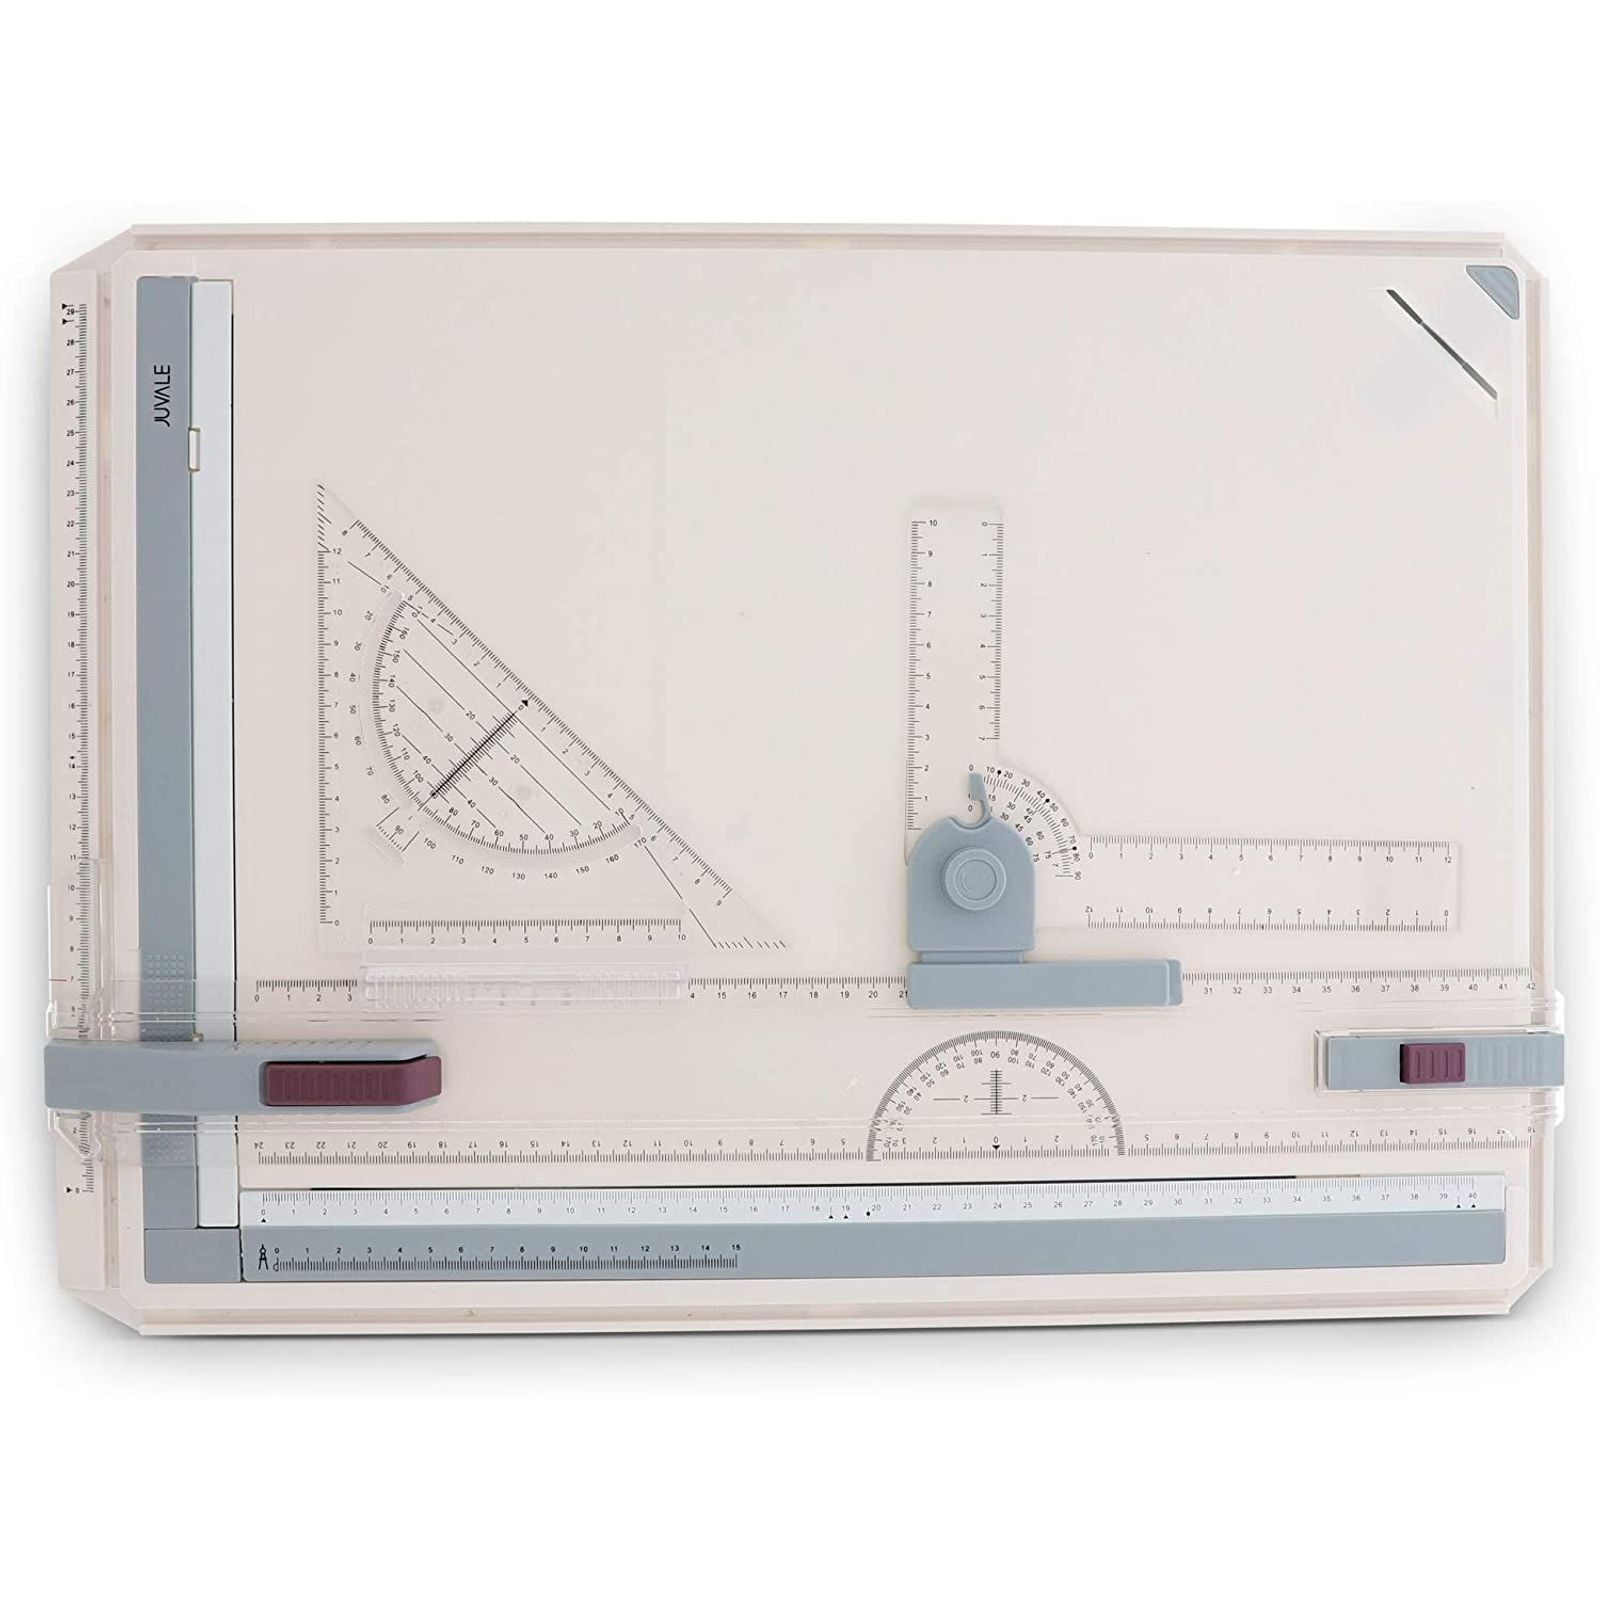 A3 A4 DRAWING BOARD ART ARCHITECTURE PARALLEL MOTION ADJUSTABLE ANGLE TOOLS KIT 